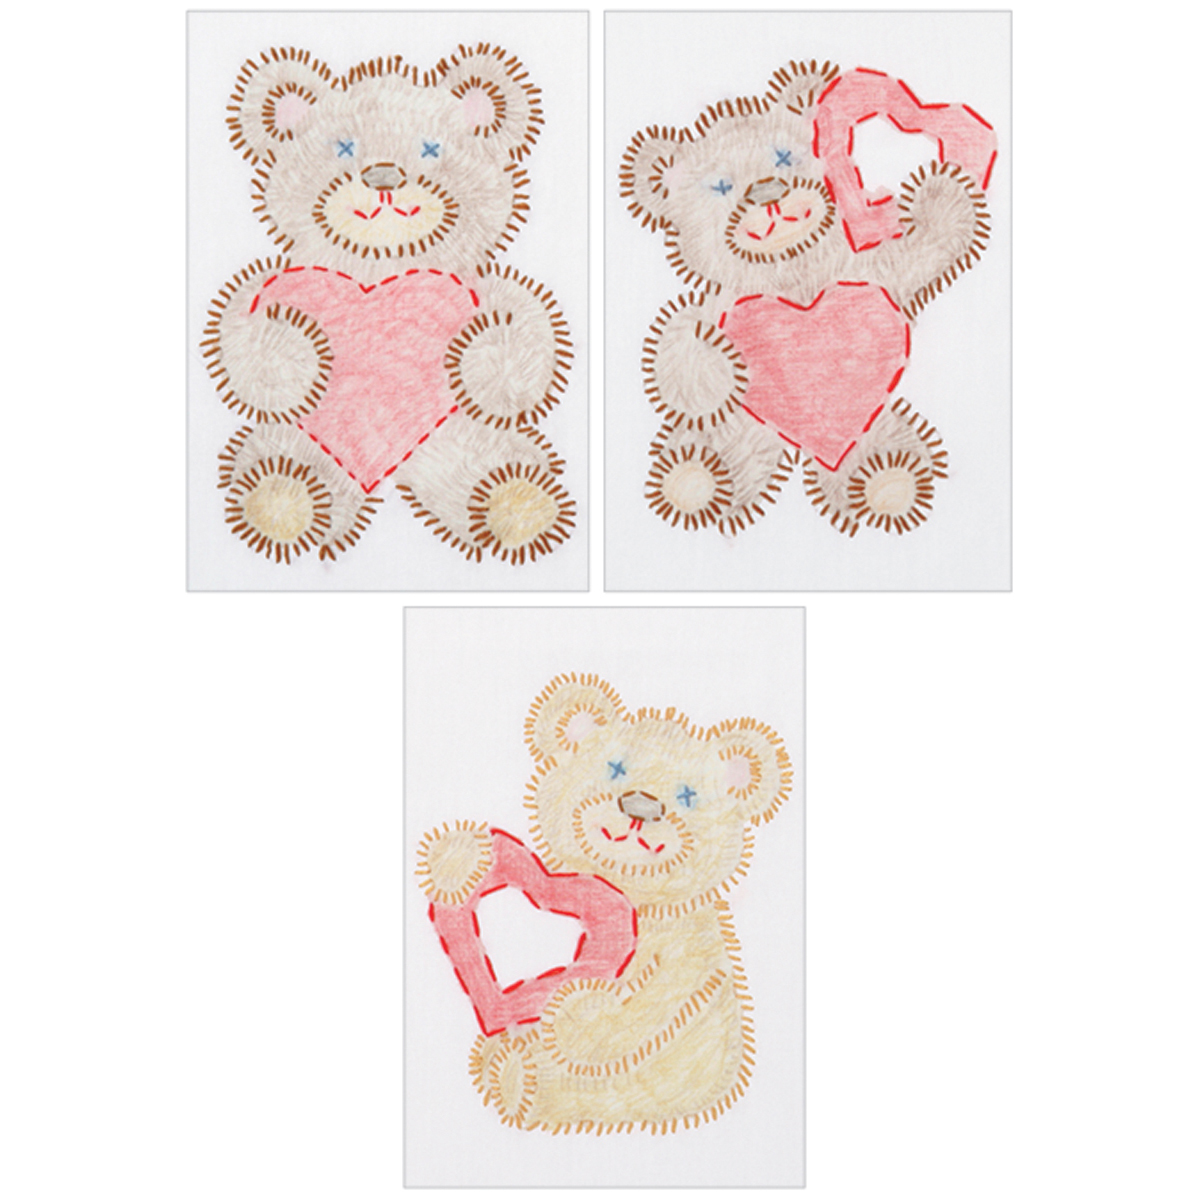 Stamped Embroidery Kit Beginner Samplers 6" x 8" 3 per package, Fuzzy Bears - image 2 of 3